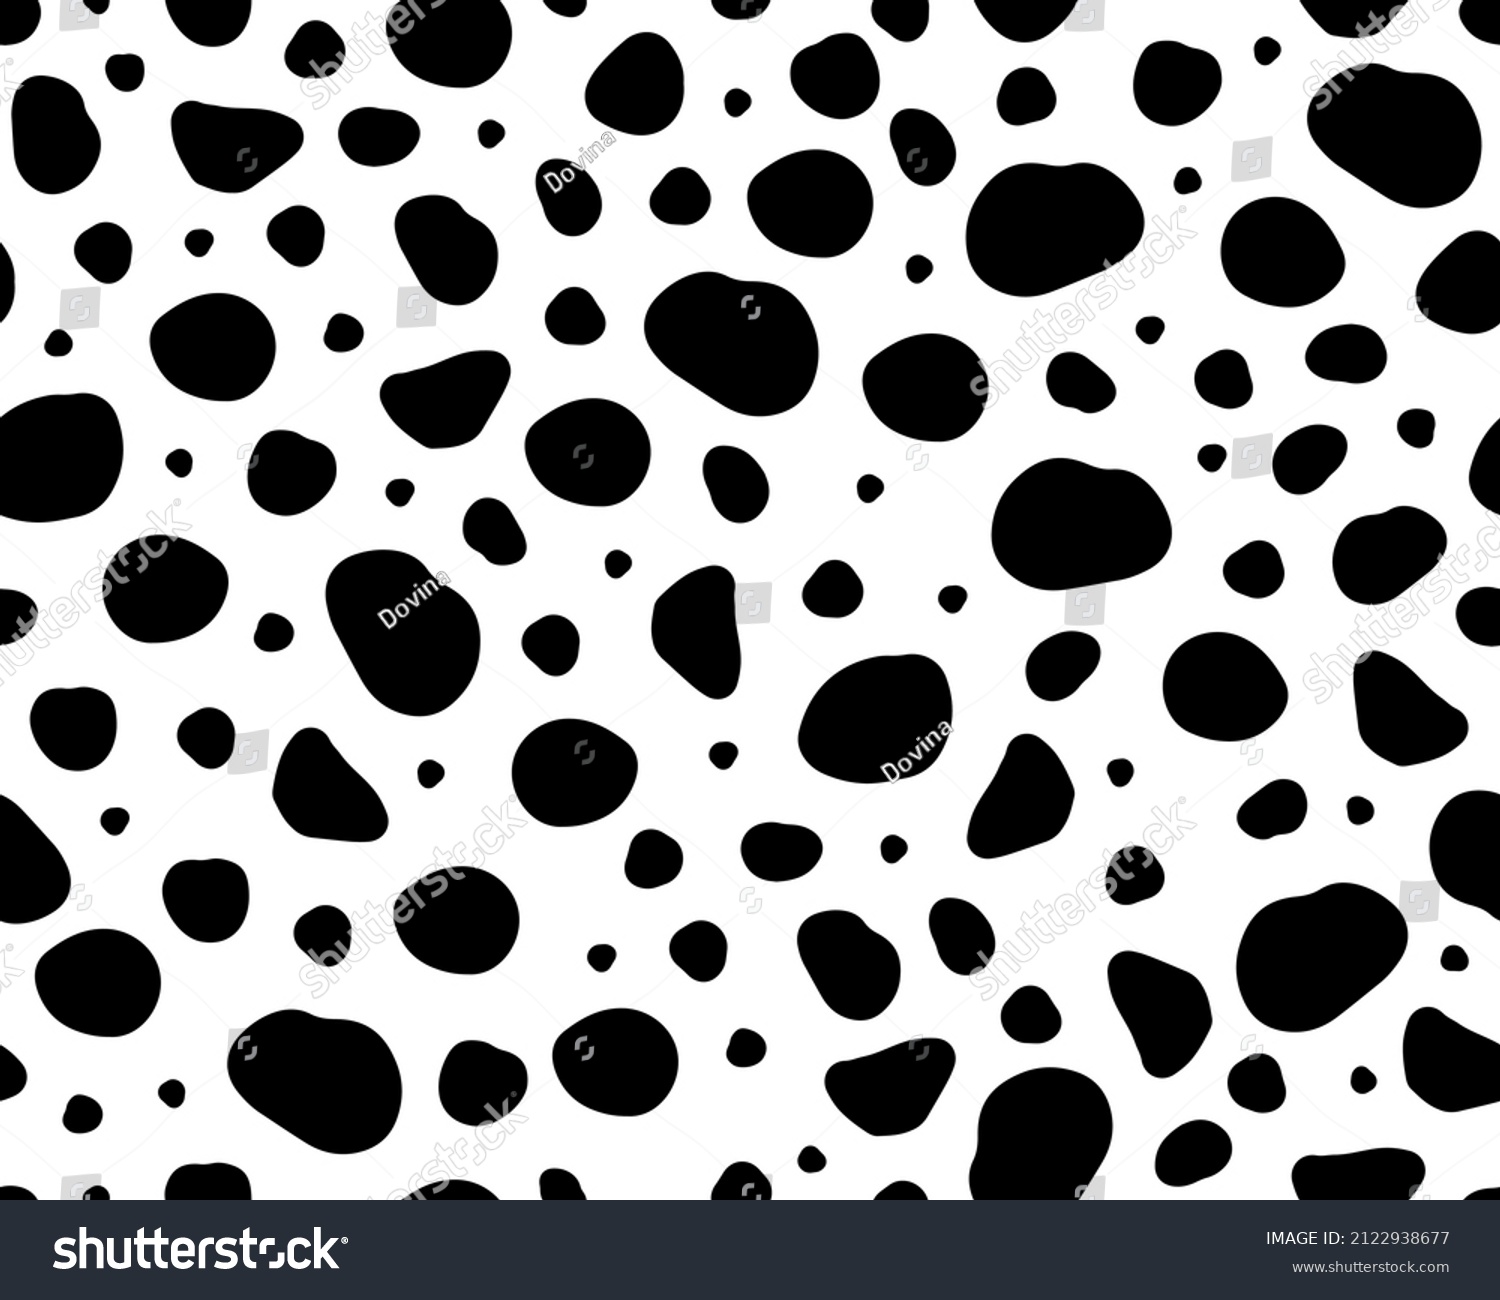 SVG of Dalmatian seamless pattern. Black uneven spots animal print. Abstract background with black and white circles. Vector background.  svg